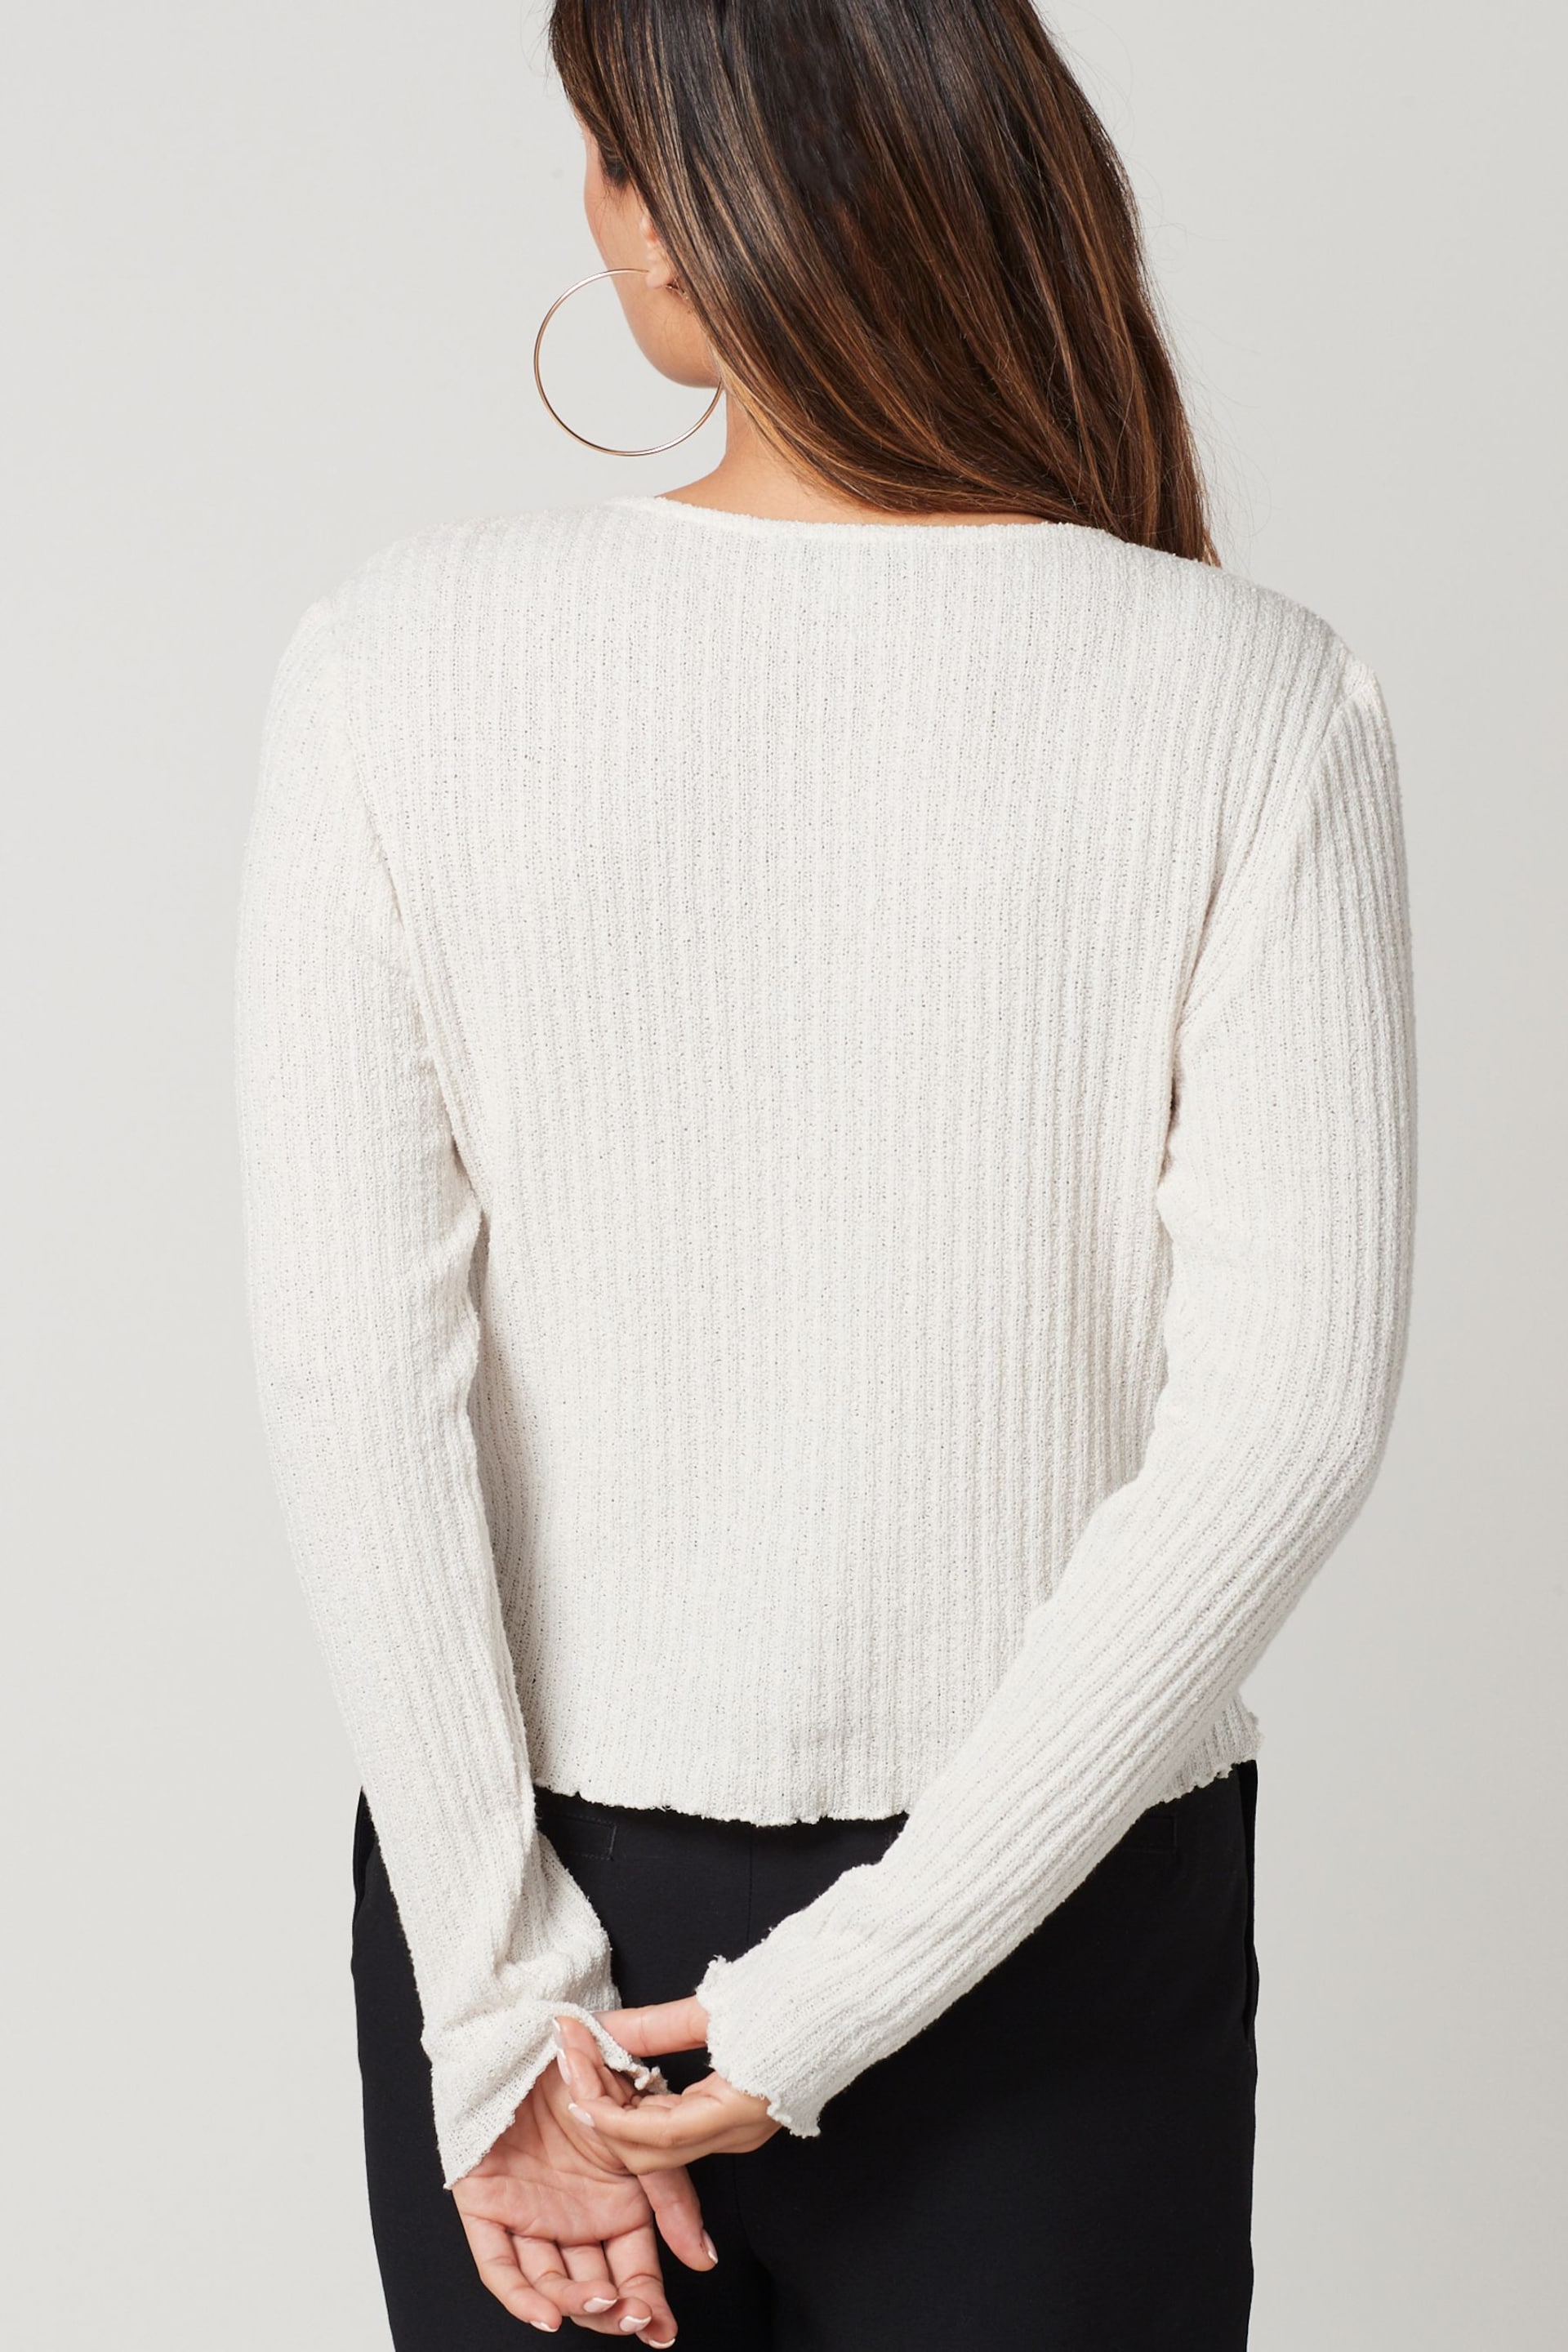 Ecru White Long Sleeve Knit Look Button Detail Cardigan - Image 3 of 6